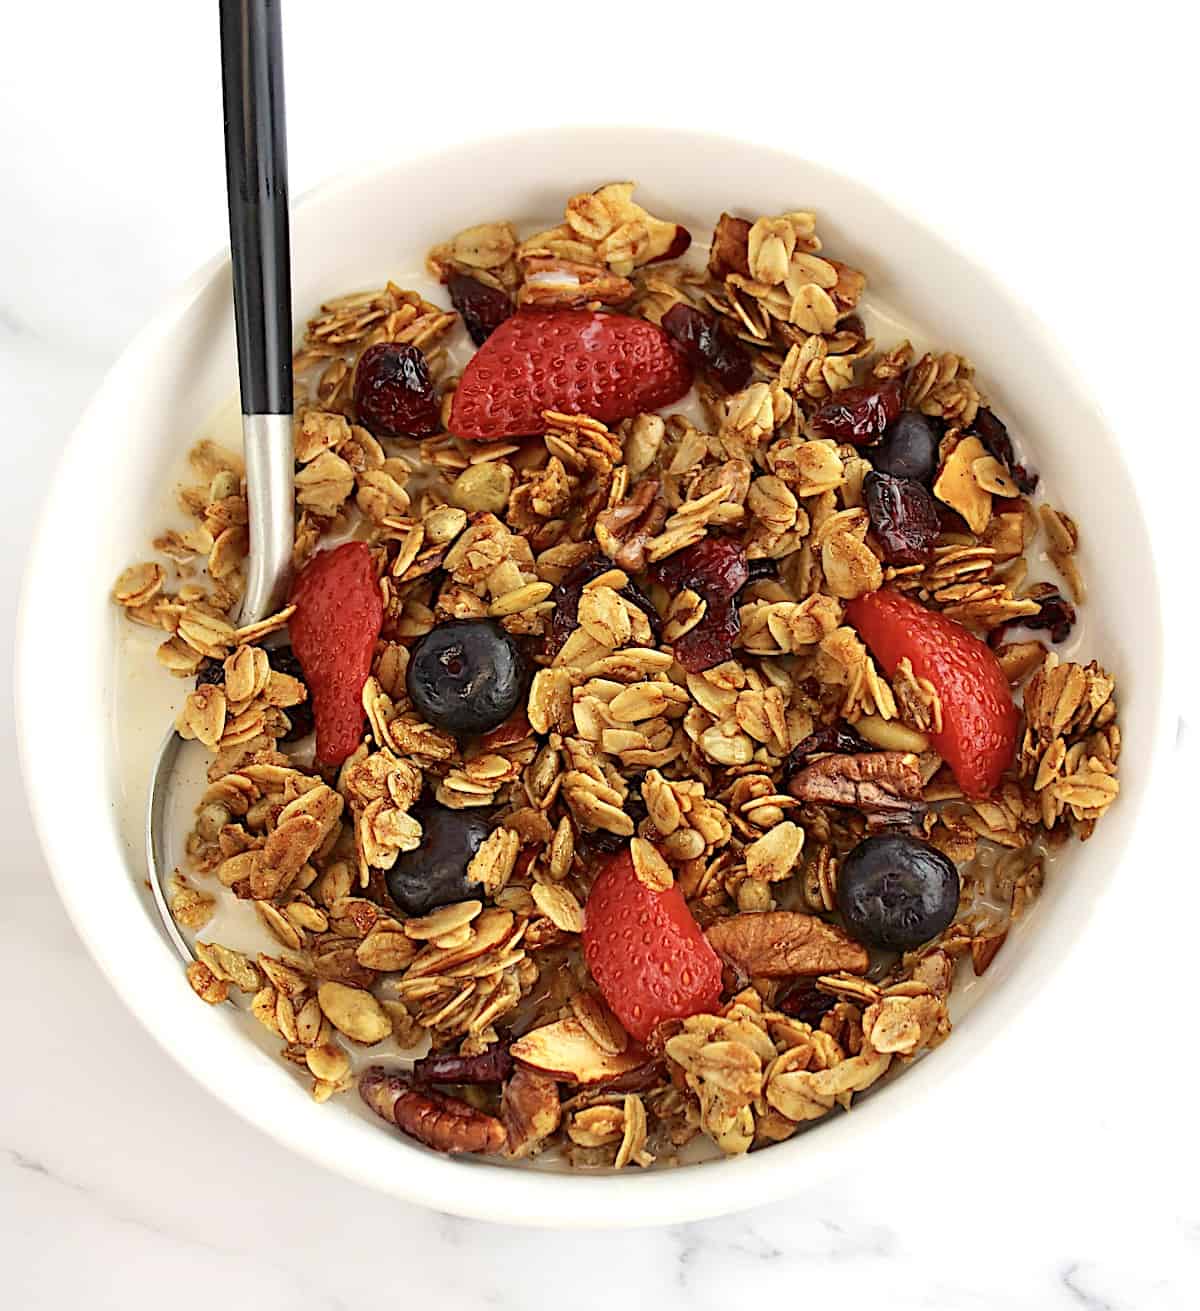 Homemade Granola cereal in white bowl with strawberries and blueberries